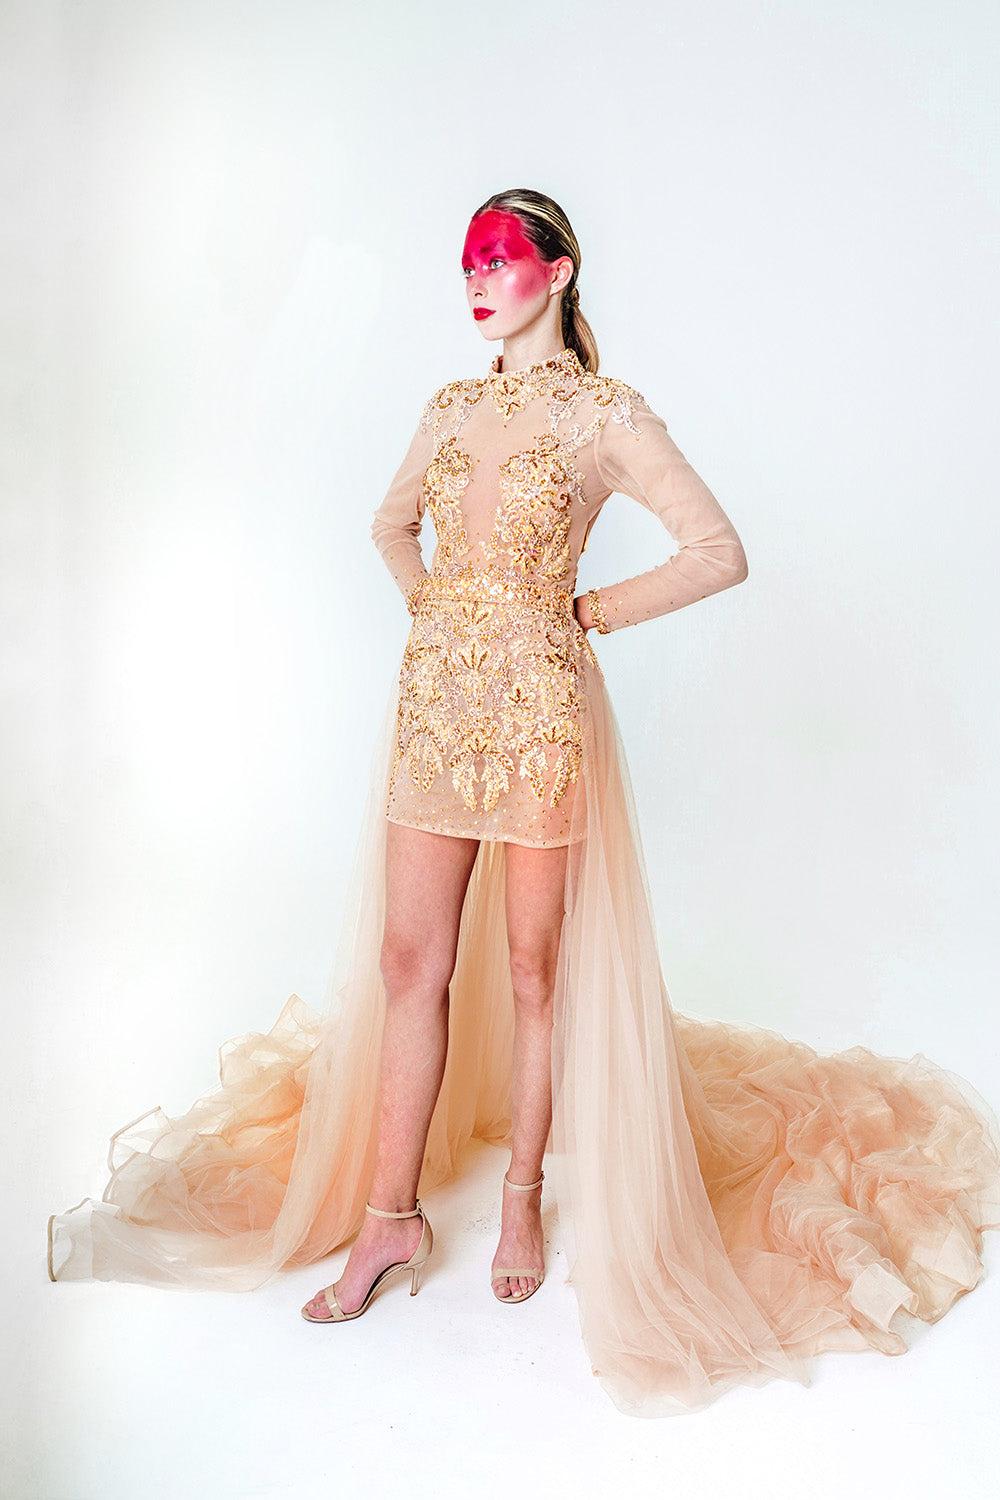 NUDE MINI DRESS WITH GOLD EMBROIDERY AND DETACHABLE SKIRT